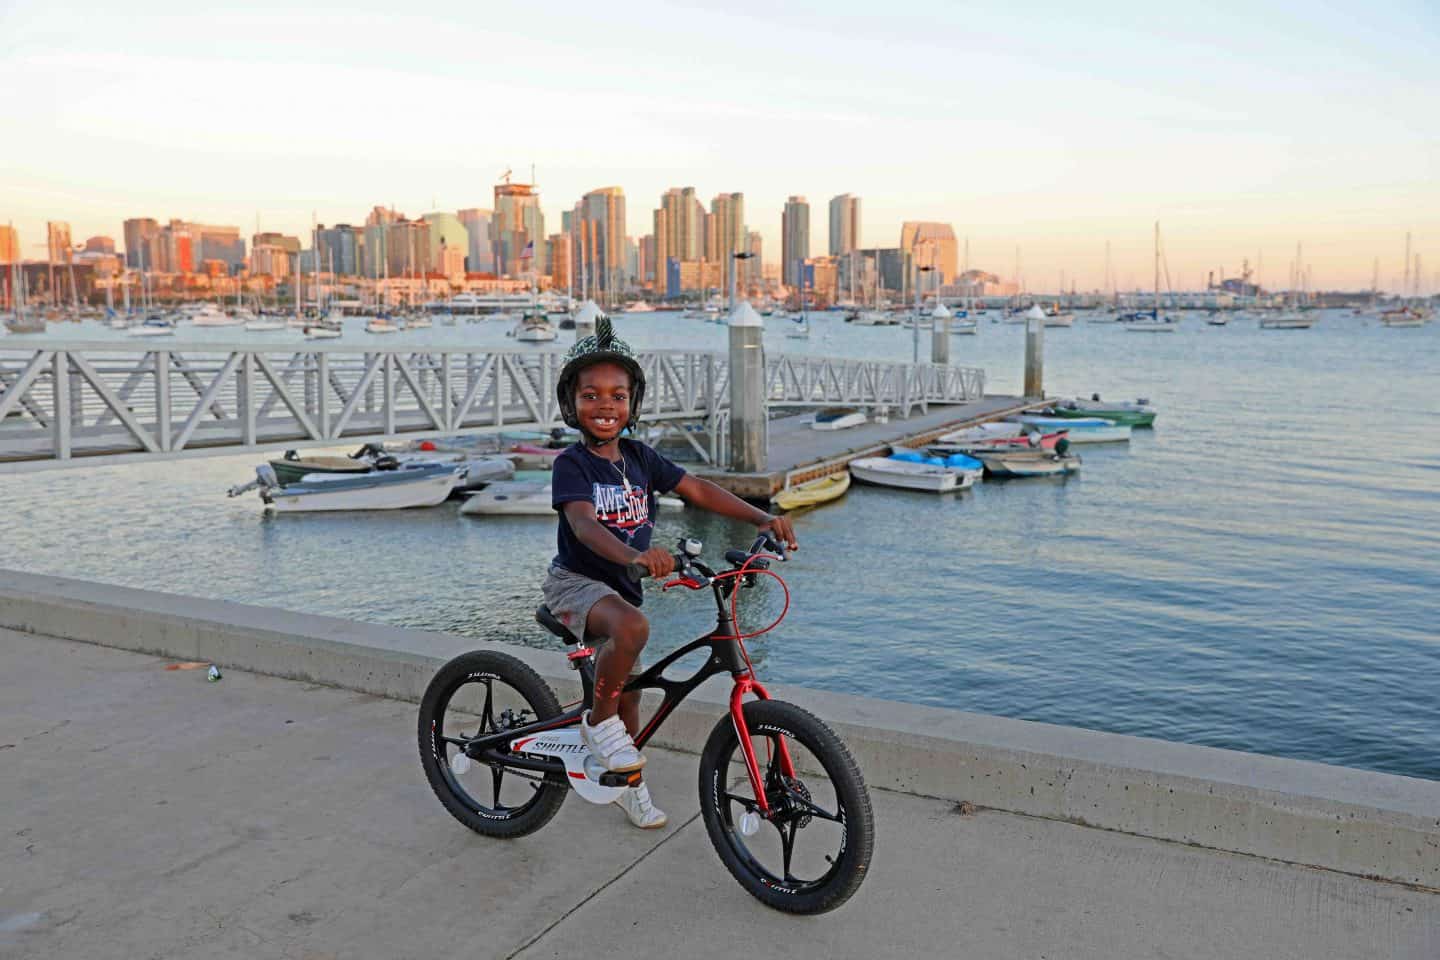 Riding bikes in Harbor View